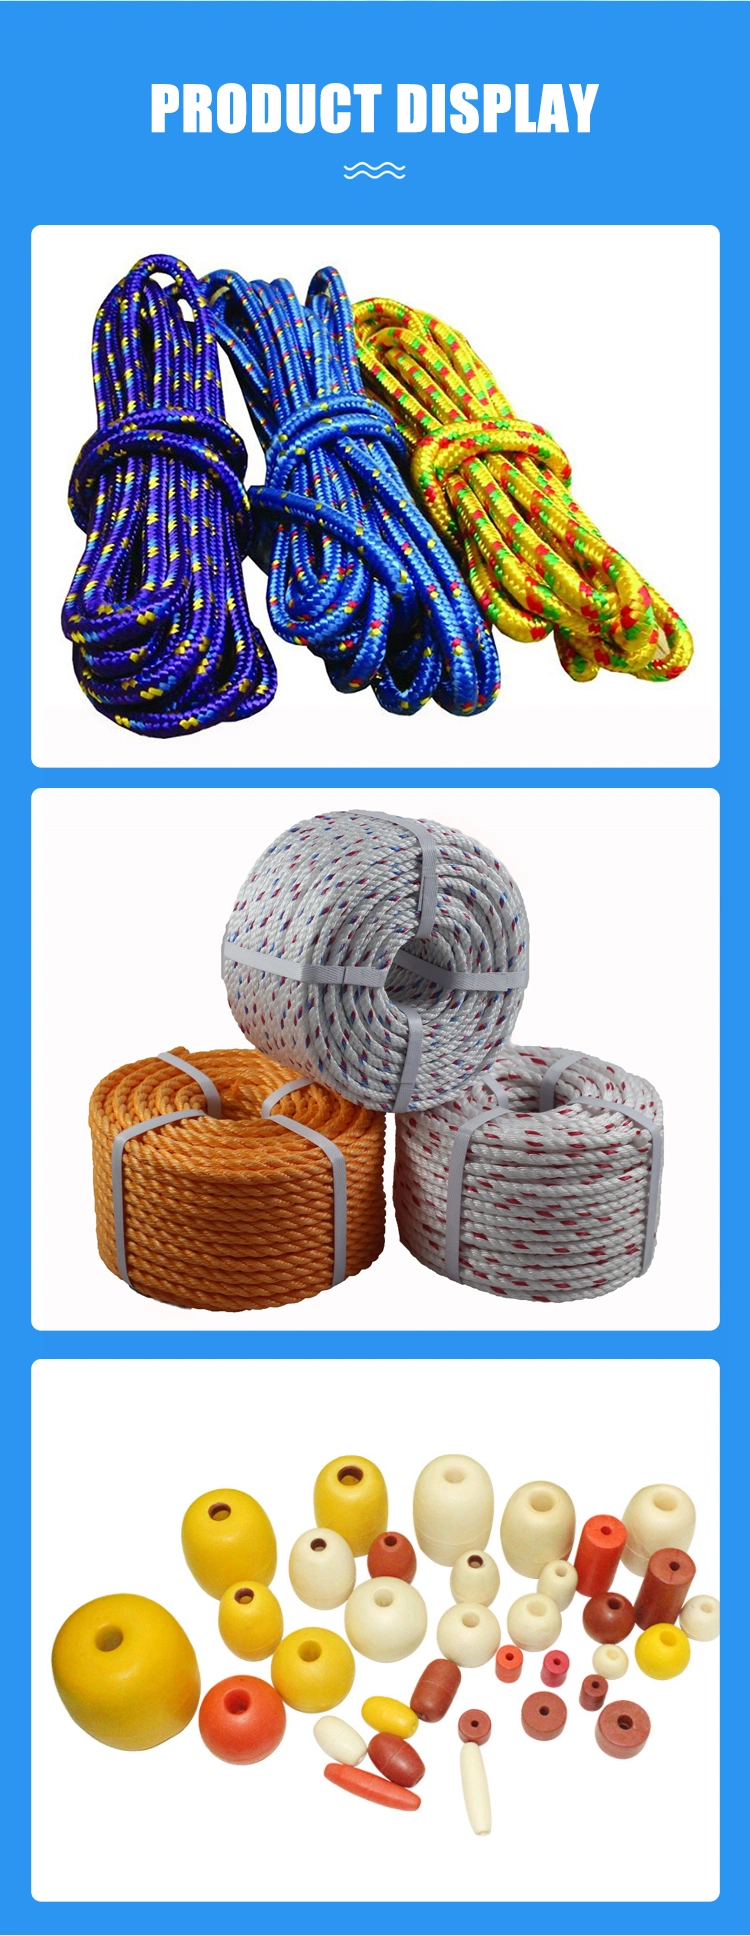 Nylon PP PE Fiber Rope Made in Korea Competitive Price Fishing Outdoor Sports Entertainment Low Price